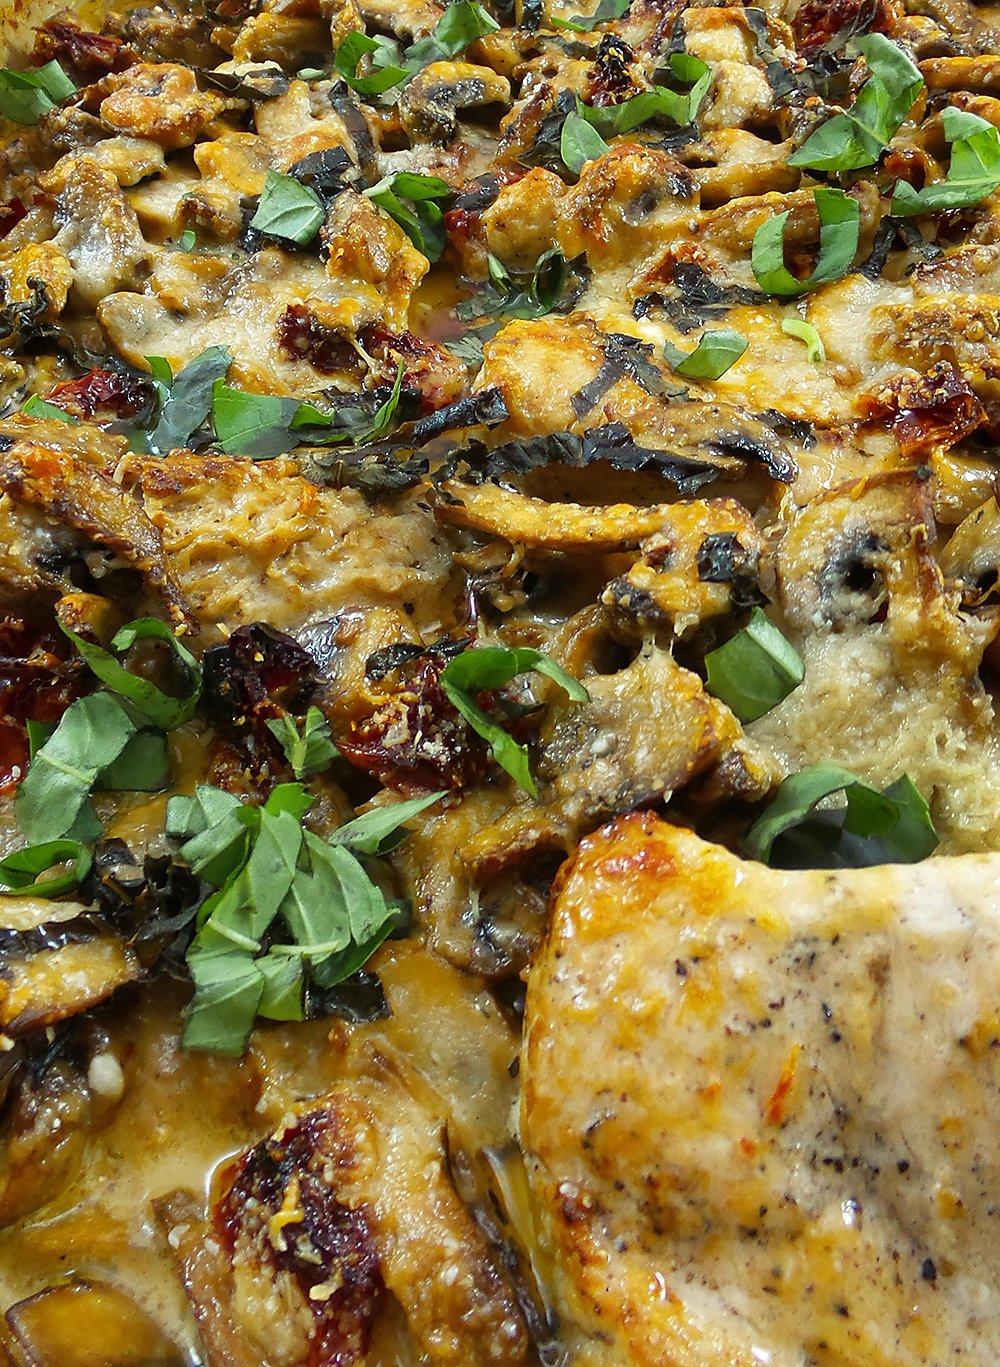 Rich creamy cheesy sauce tops savory wild turkey, mushrooms and sun-dried tomatoes in this bubbly casserole.